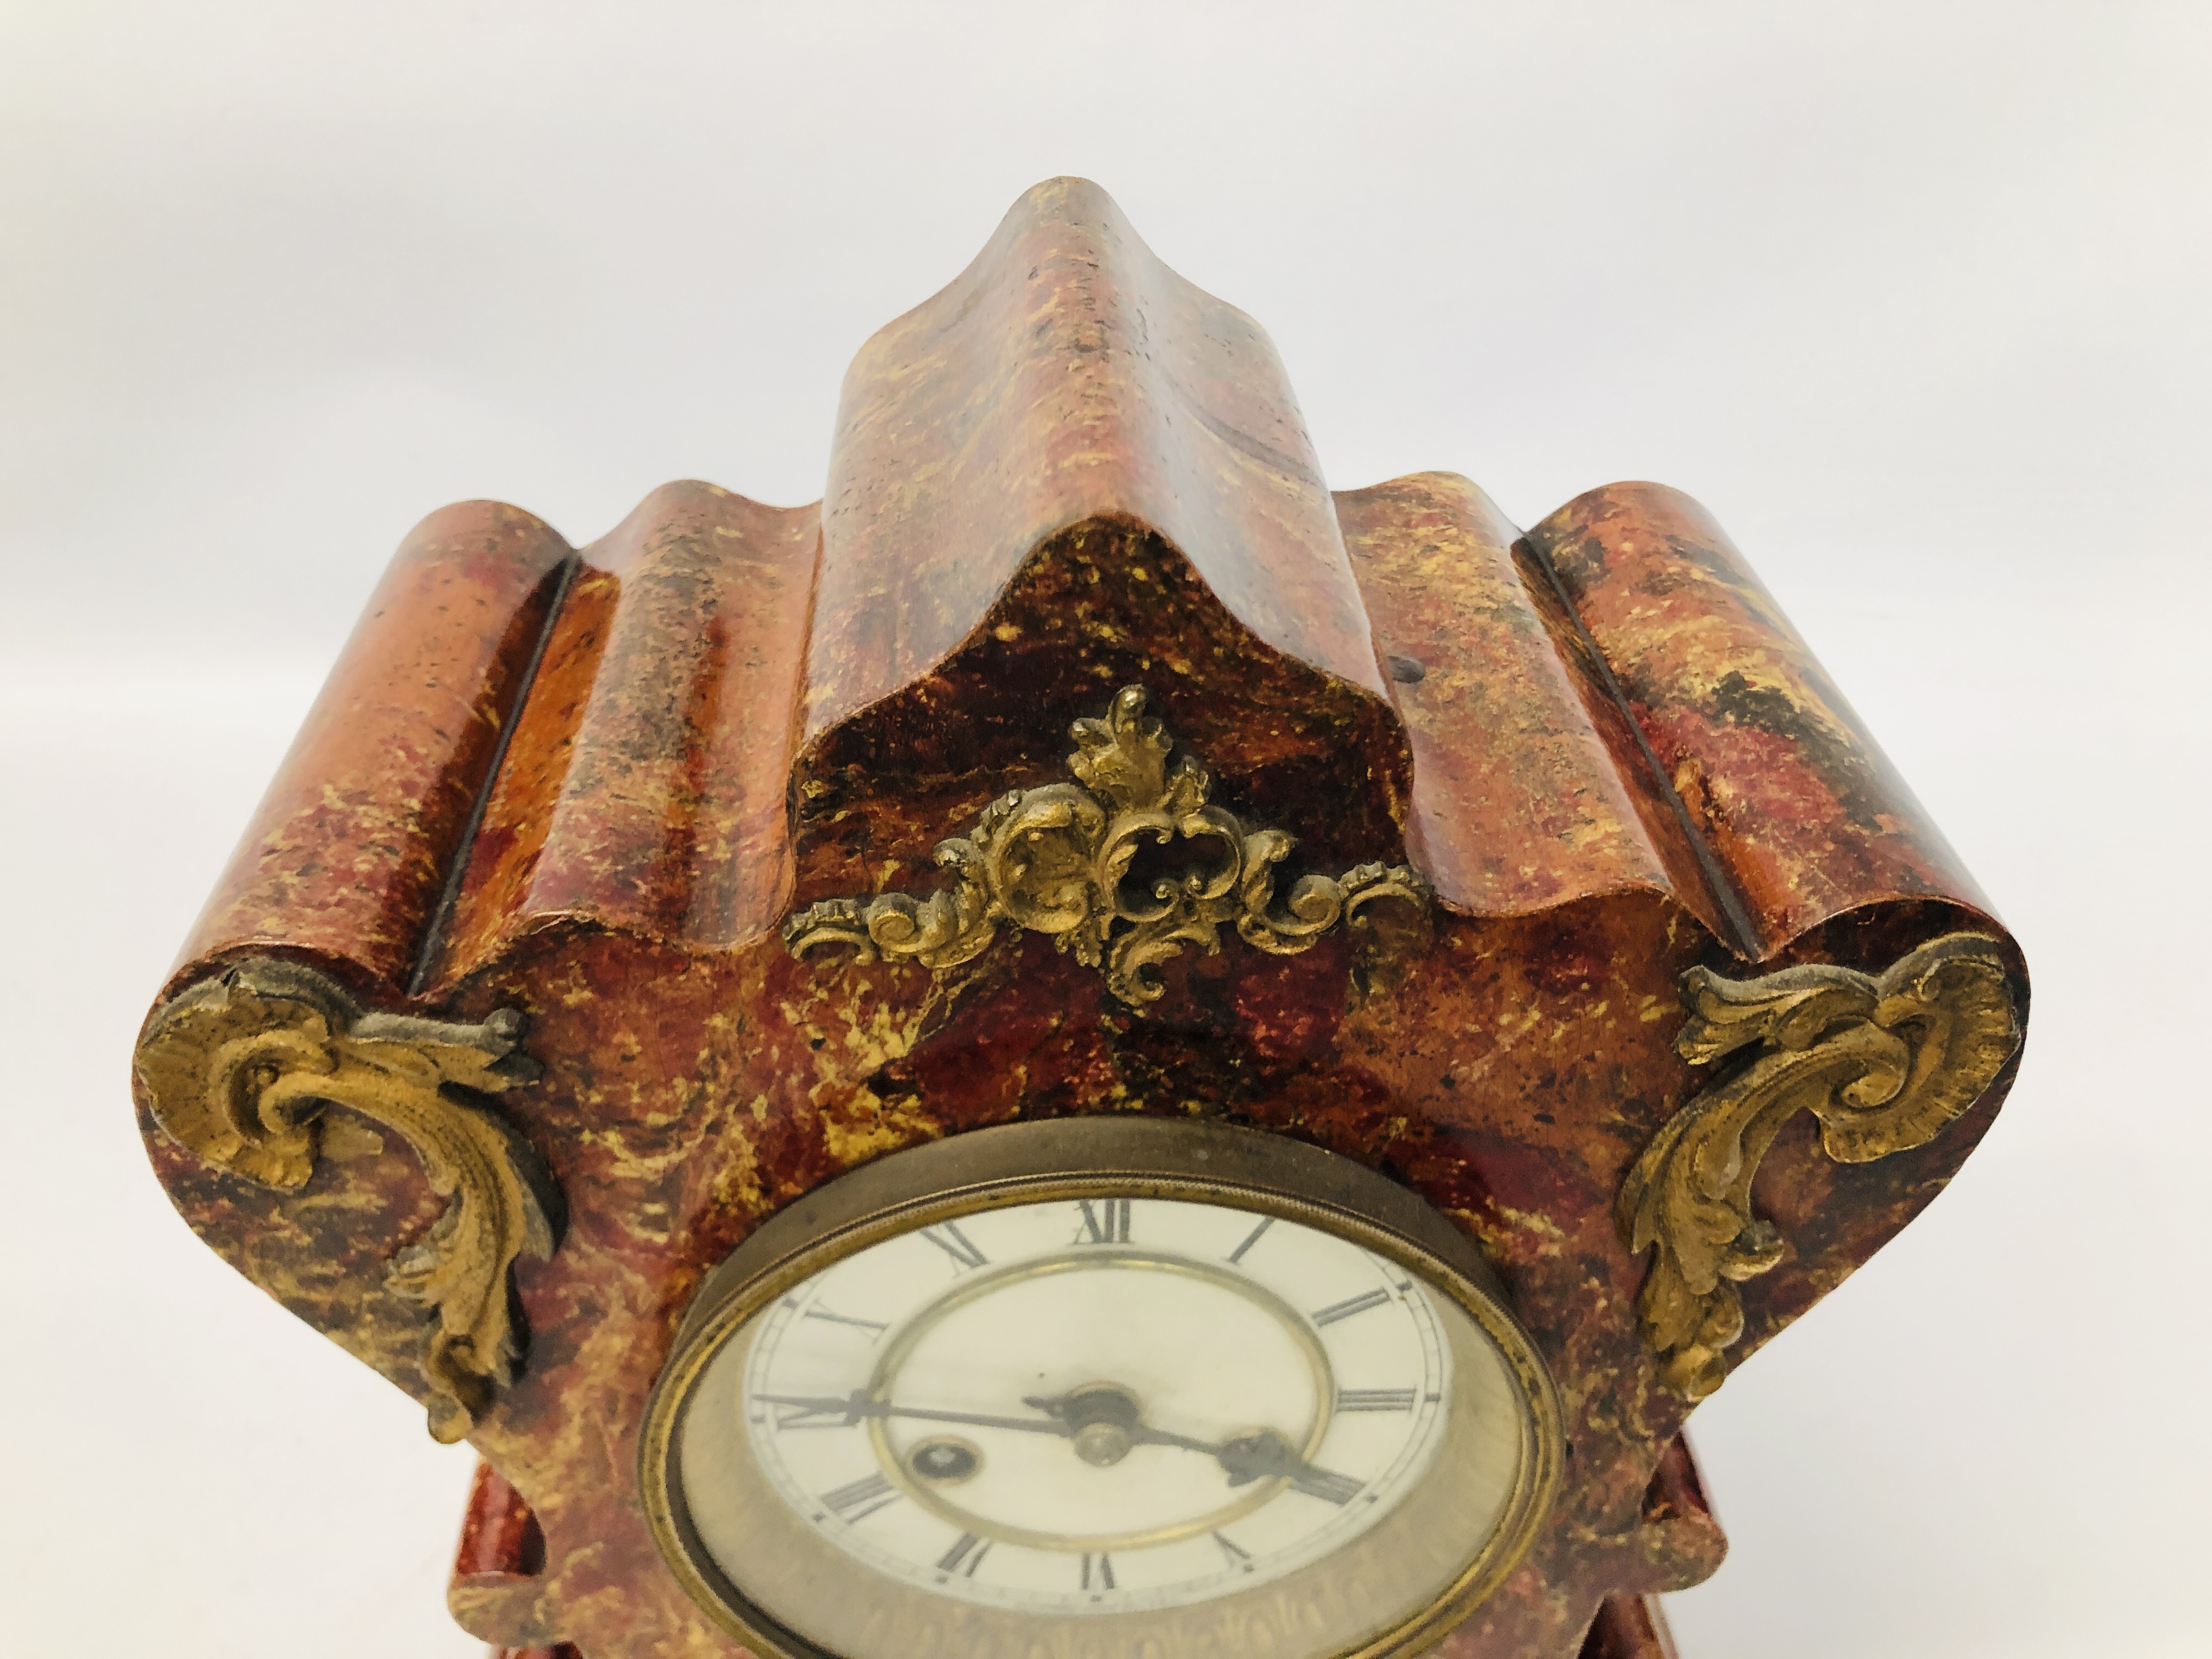 A CATANIA NEW YORK MANTEL CLOCK COMPLETE WITH KEYS HEIGHT 31CM. - Image 2 of 8